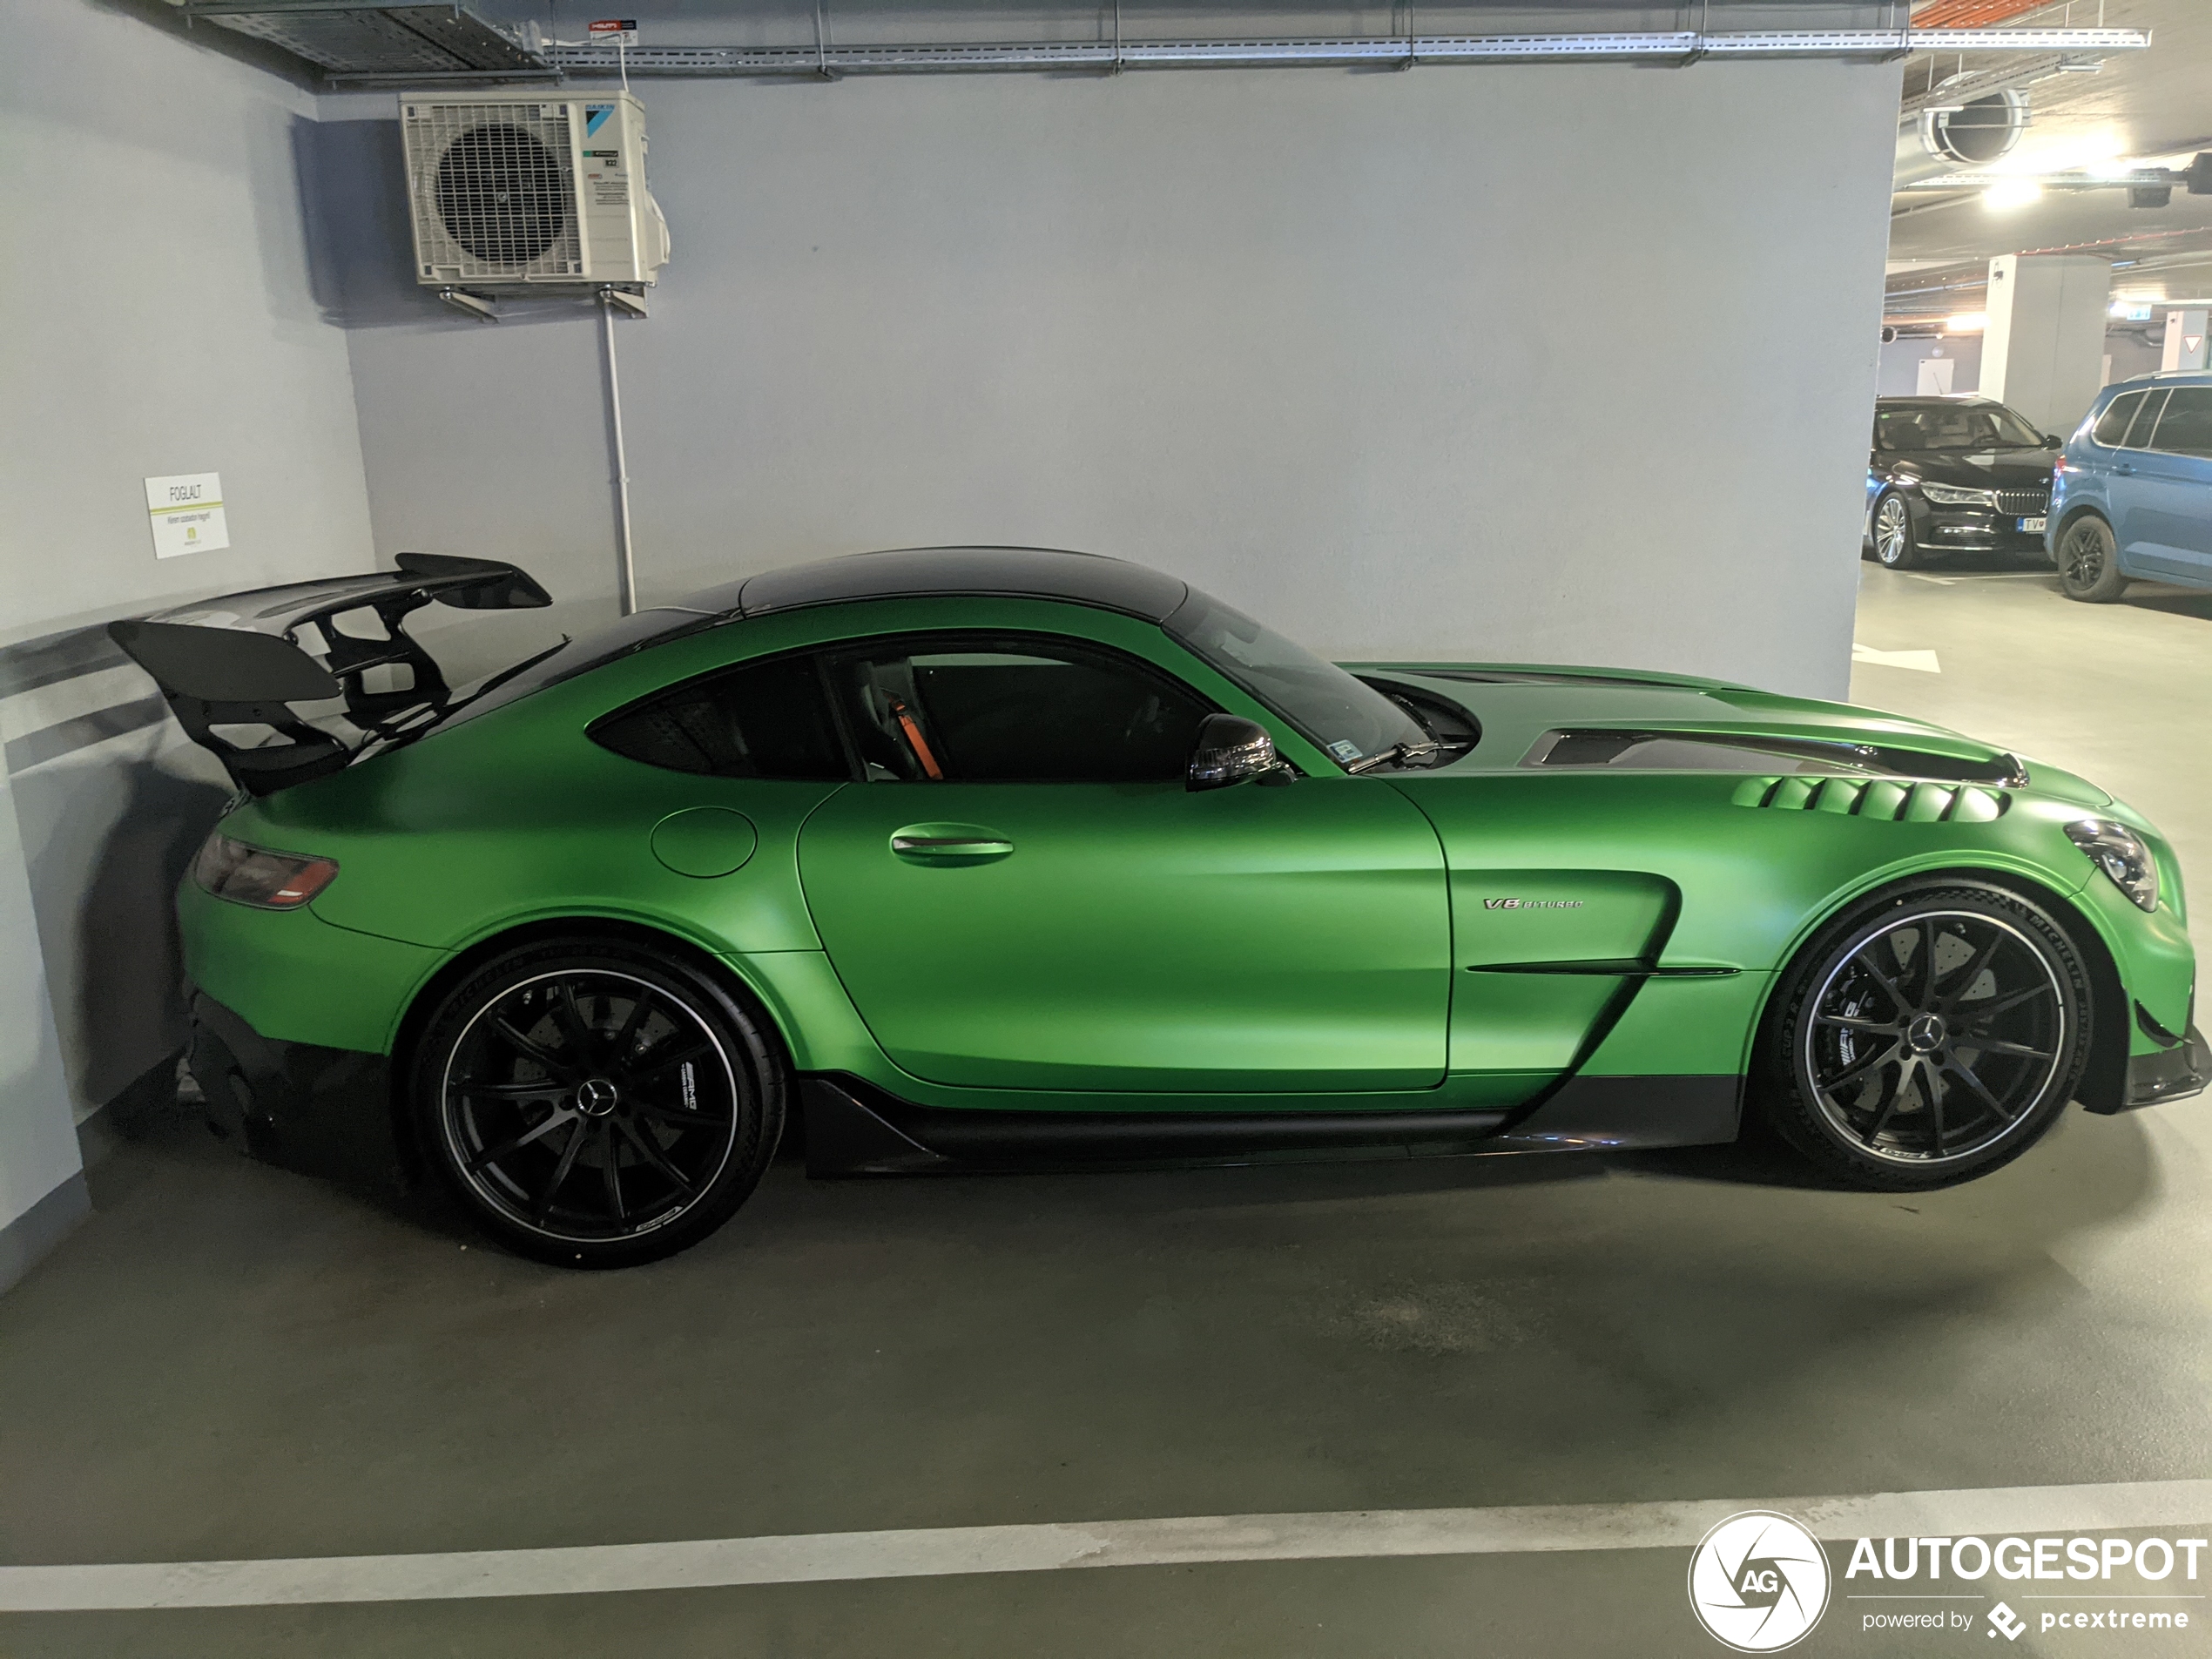 Mercedes-AMG GT Black Series in AMG Green Hell Magno is perfect